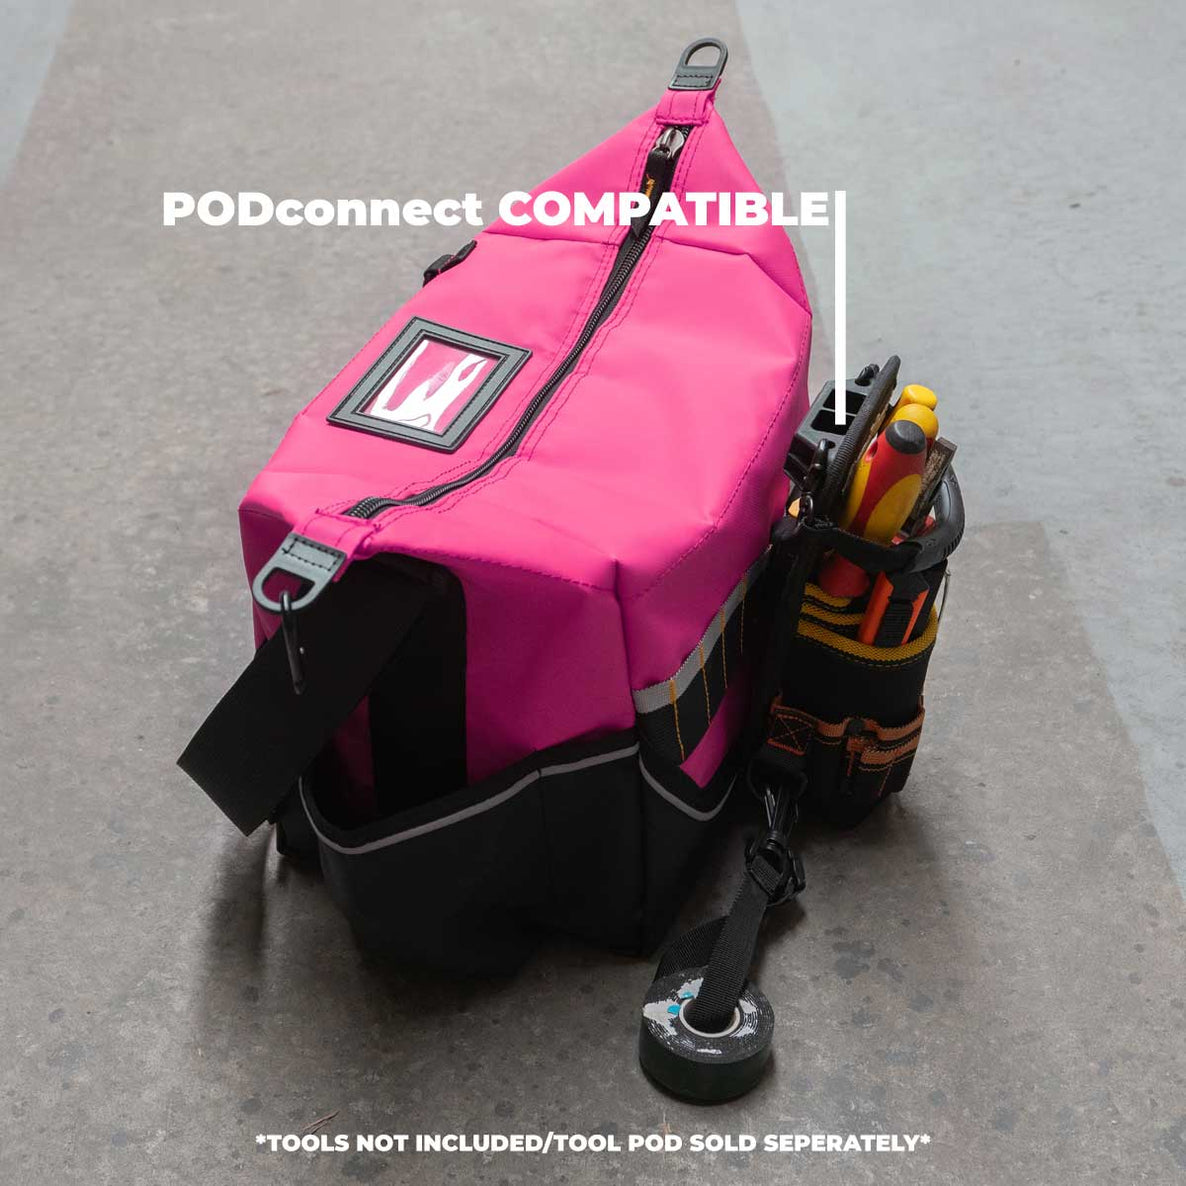 Insulated Pink PVC Crib Bag RX05L106PVCPK by Rugged Xtremes